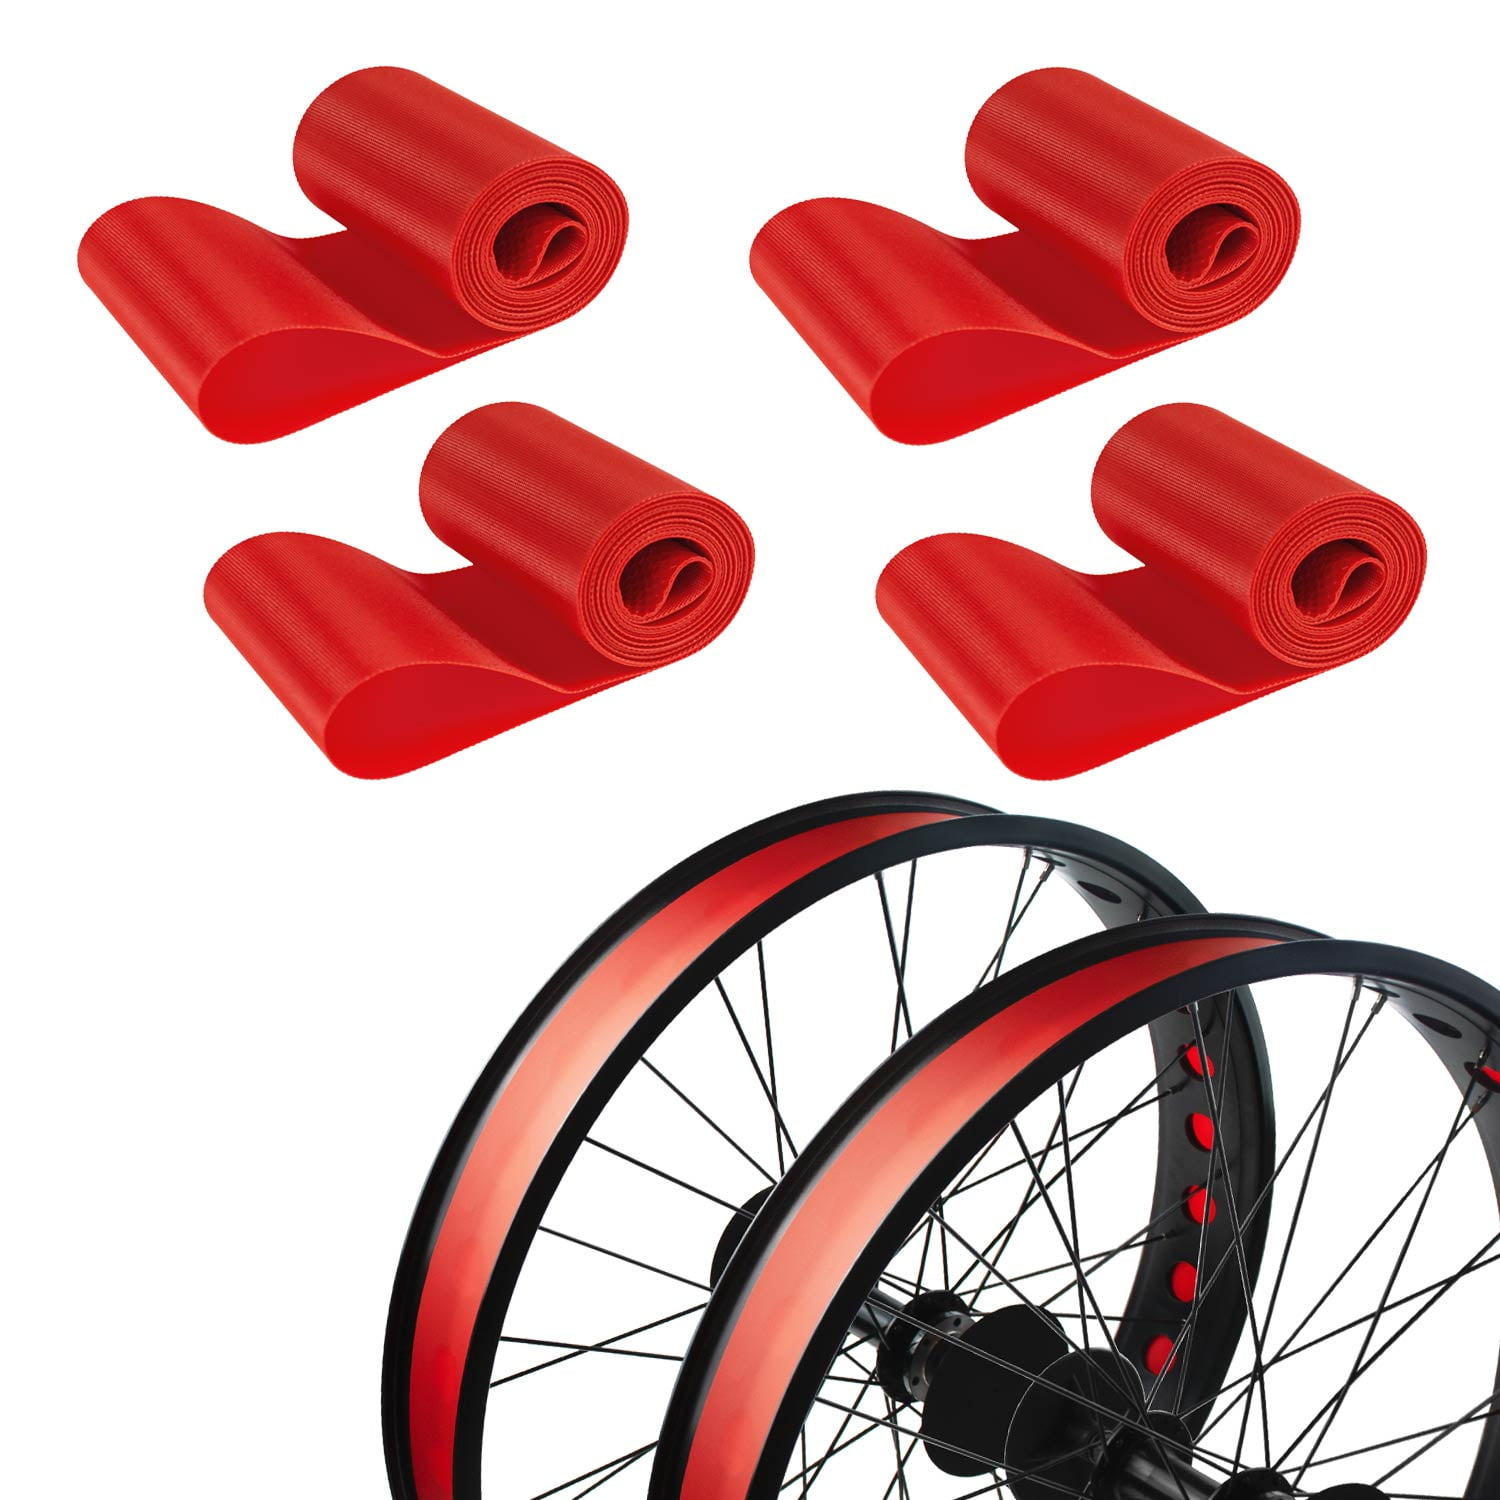 Bike Rim Tape,2 Pcs 1 Package Bicycle Rim Strip Rim Tape Tire Liner Protector Suitable for 27.5 inch Tires